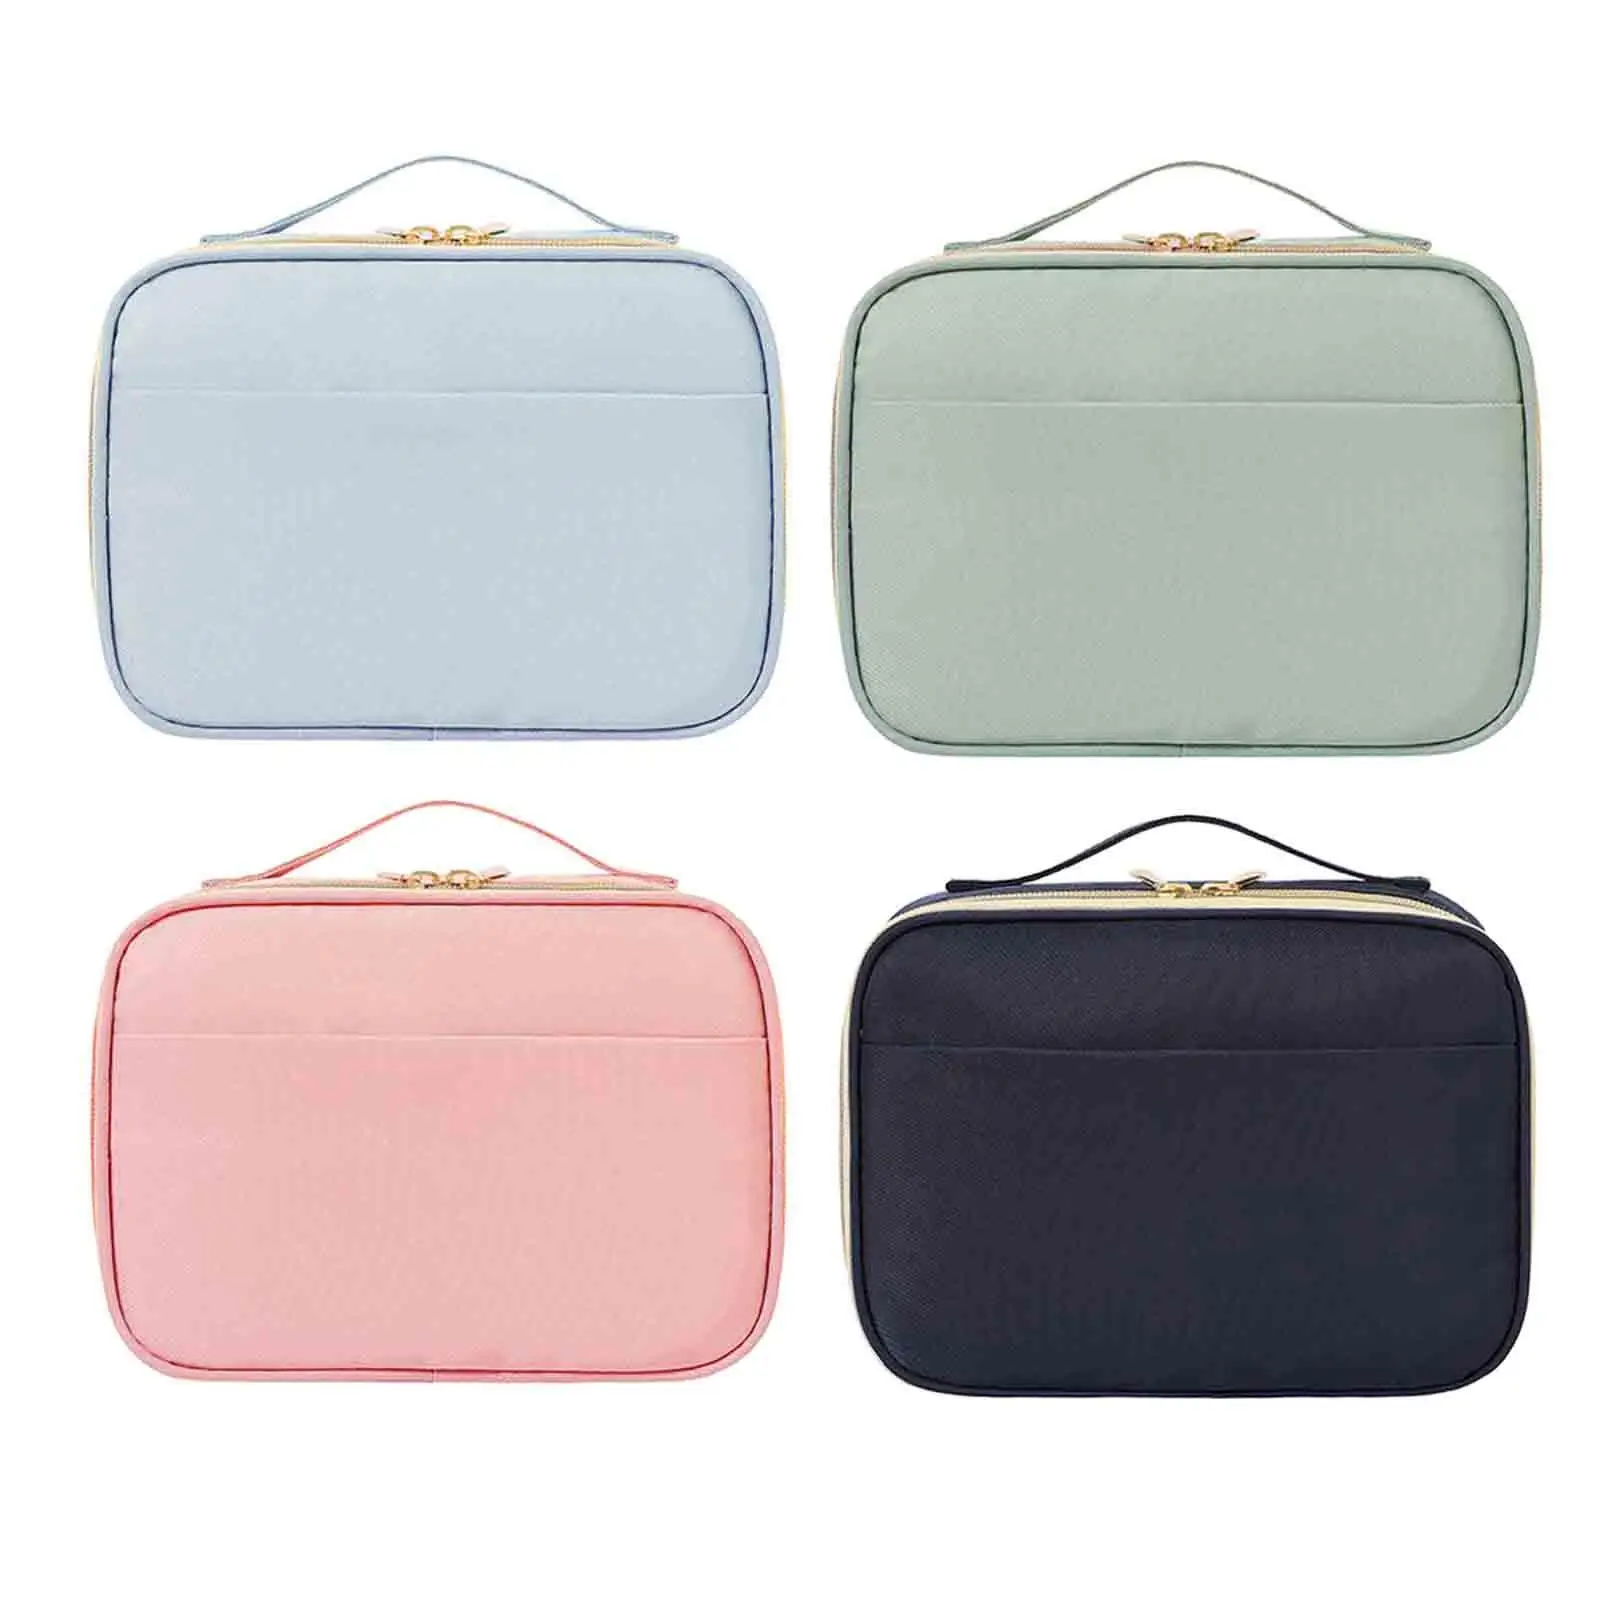 2 in 1 Makeup Bag Fashionable Stylish Cosmetics Hygiene Bag Container Travel Toiletry Bag Shower Organizer Kit for Women Girls